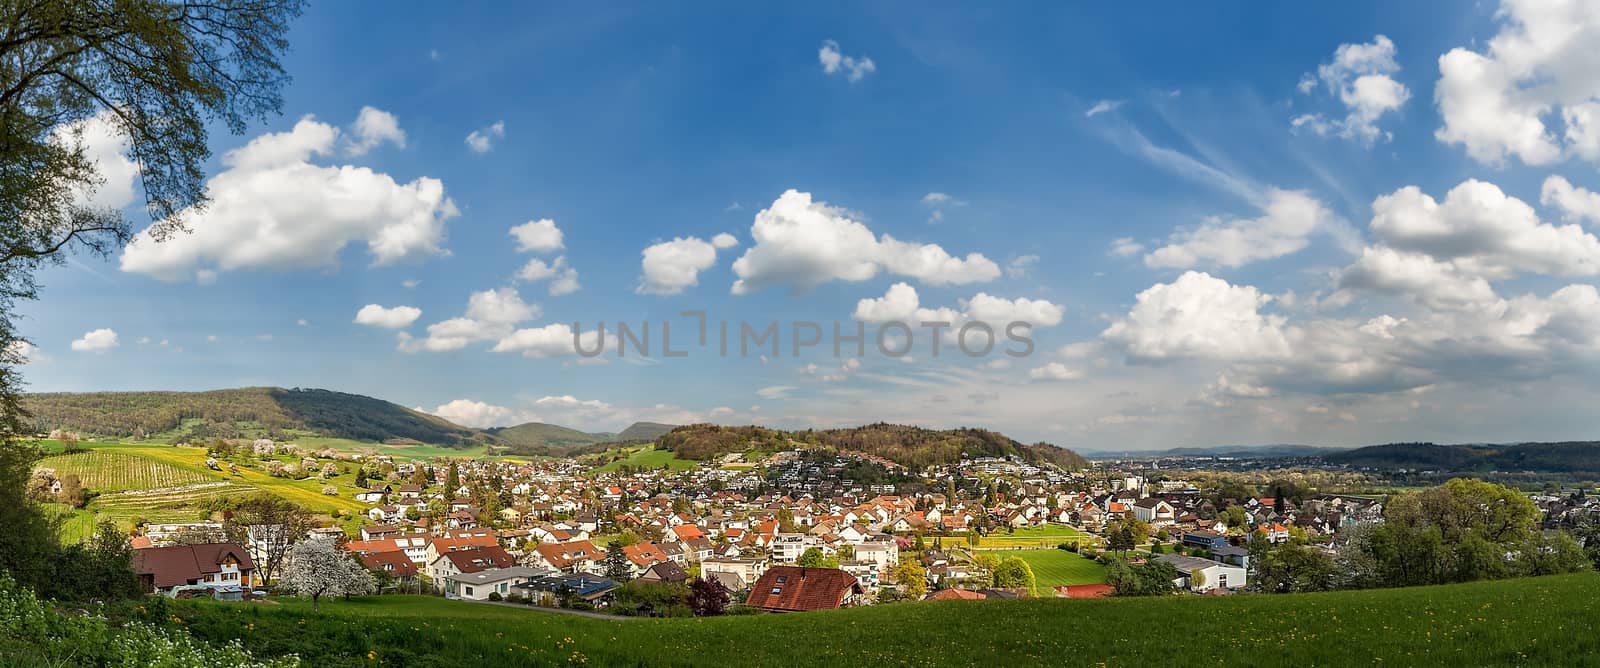 Panorama of Erlinsbach by mot1963